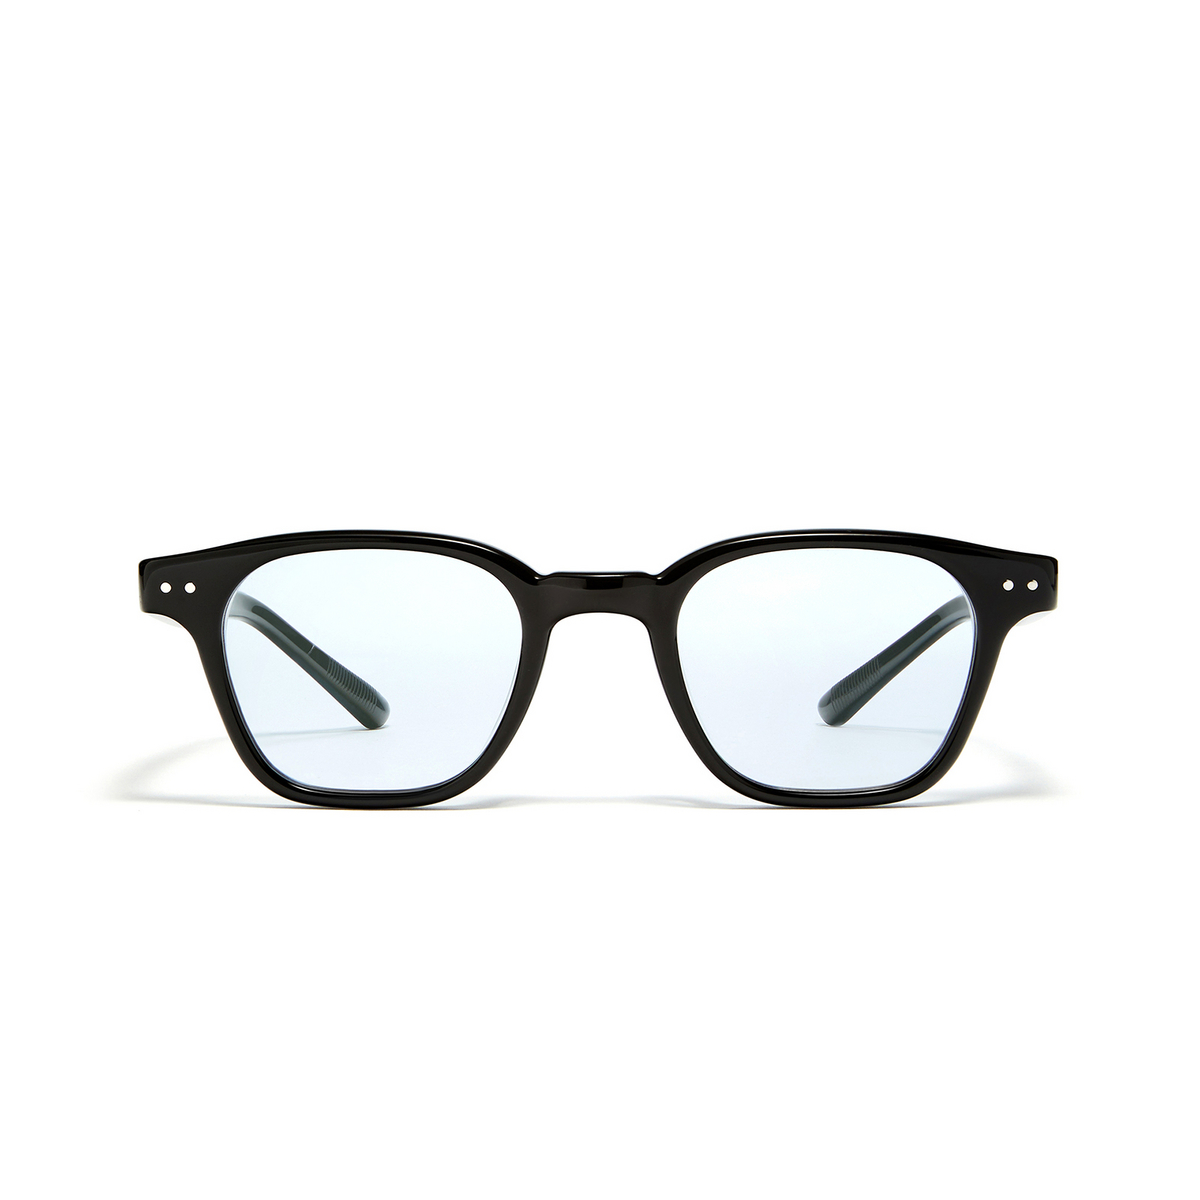 Gentle Monster® Square Eyeglasses: Cato color Black 01-B - front view.